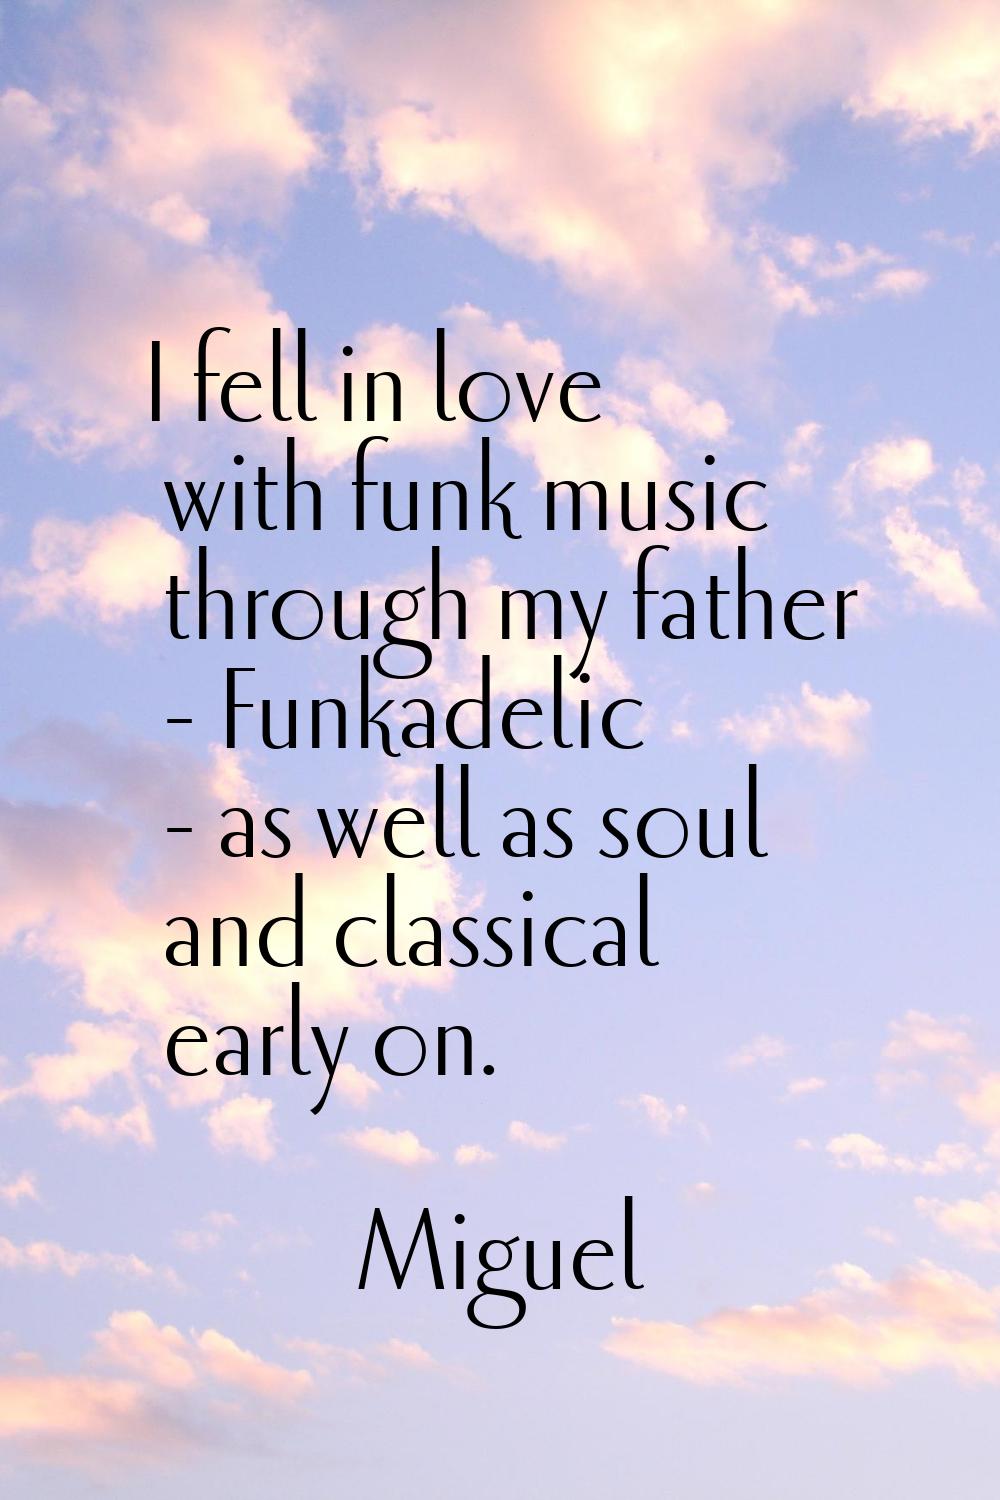 I fell in love with funk music through my father - Funkadelic - as well as soul and classical early